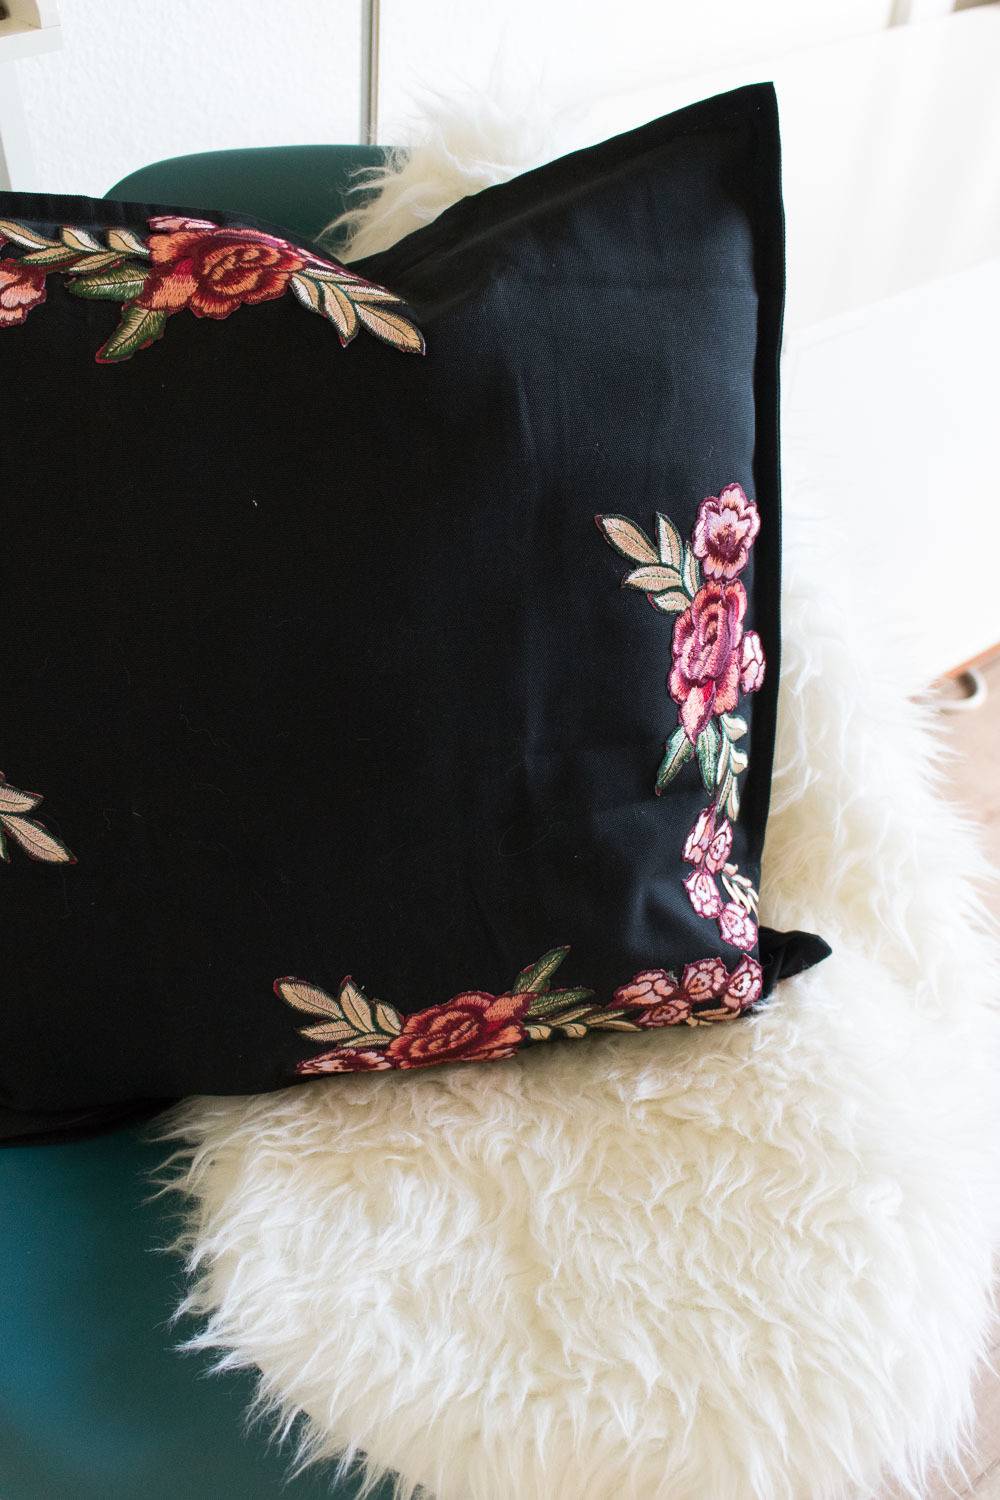 5-Minute DIY! Update any Pillow with Floral Patches